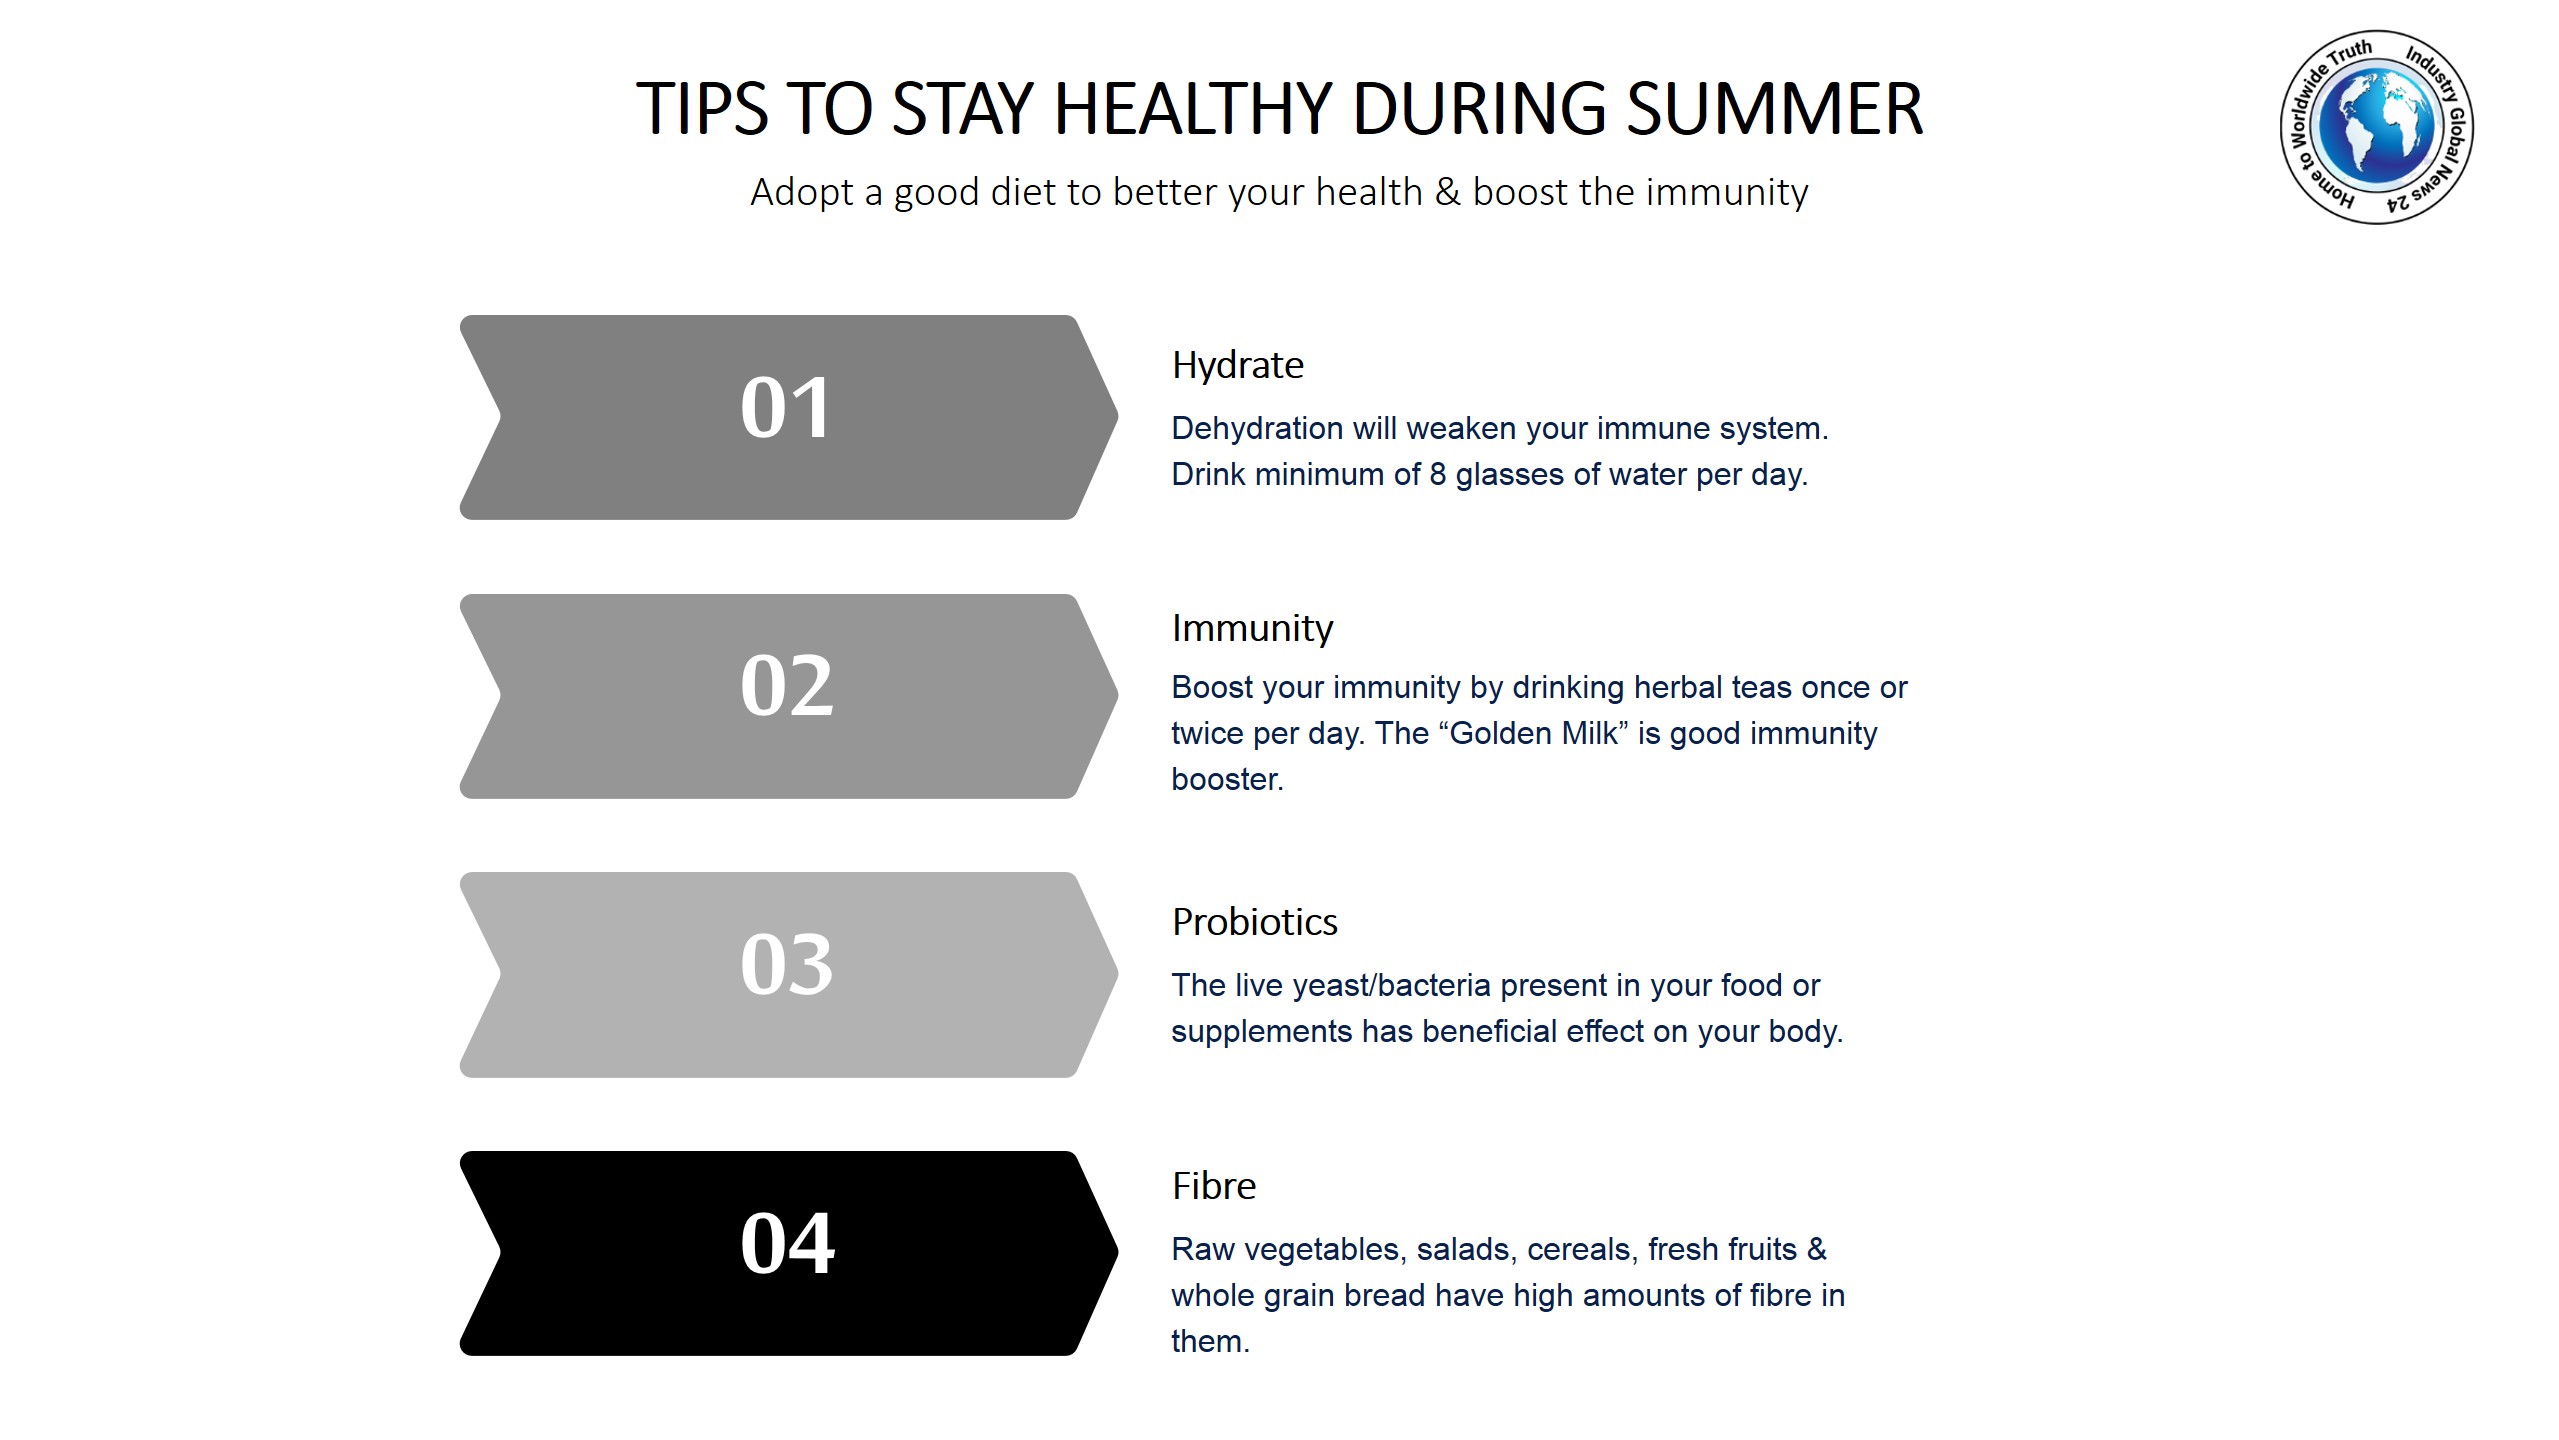 Tips to stay healthy during summer